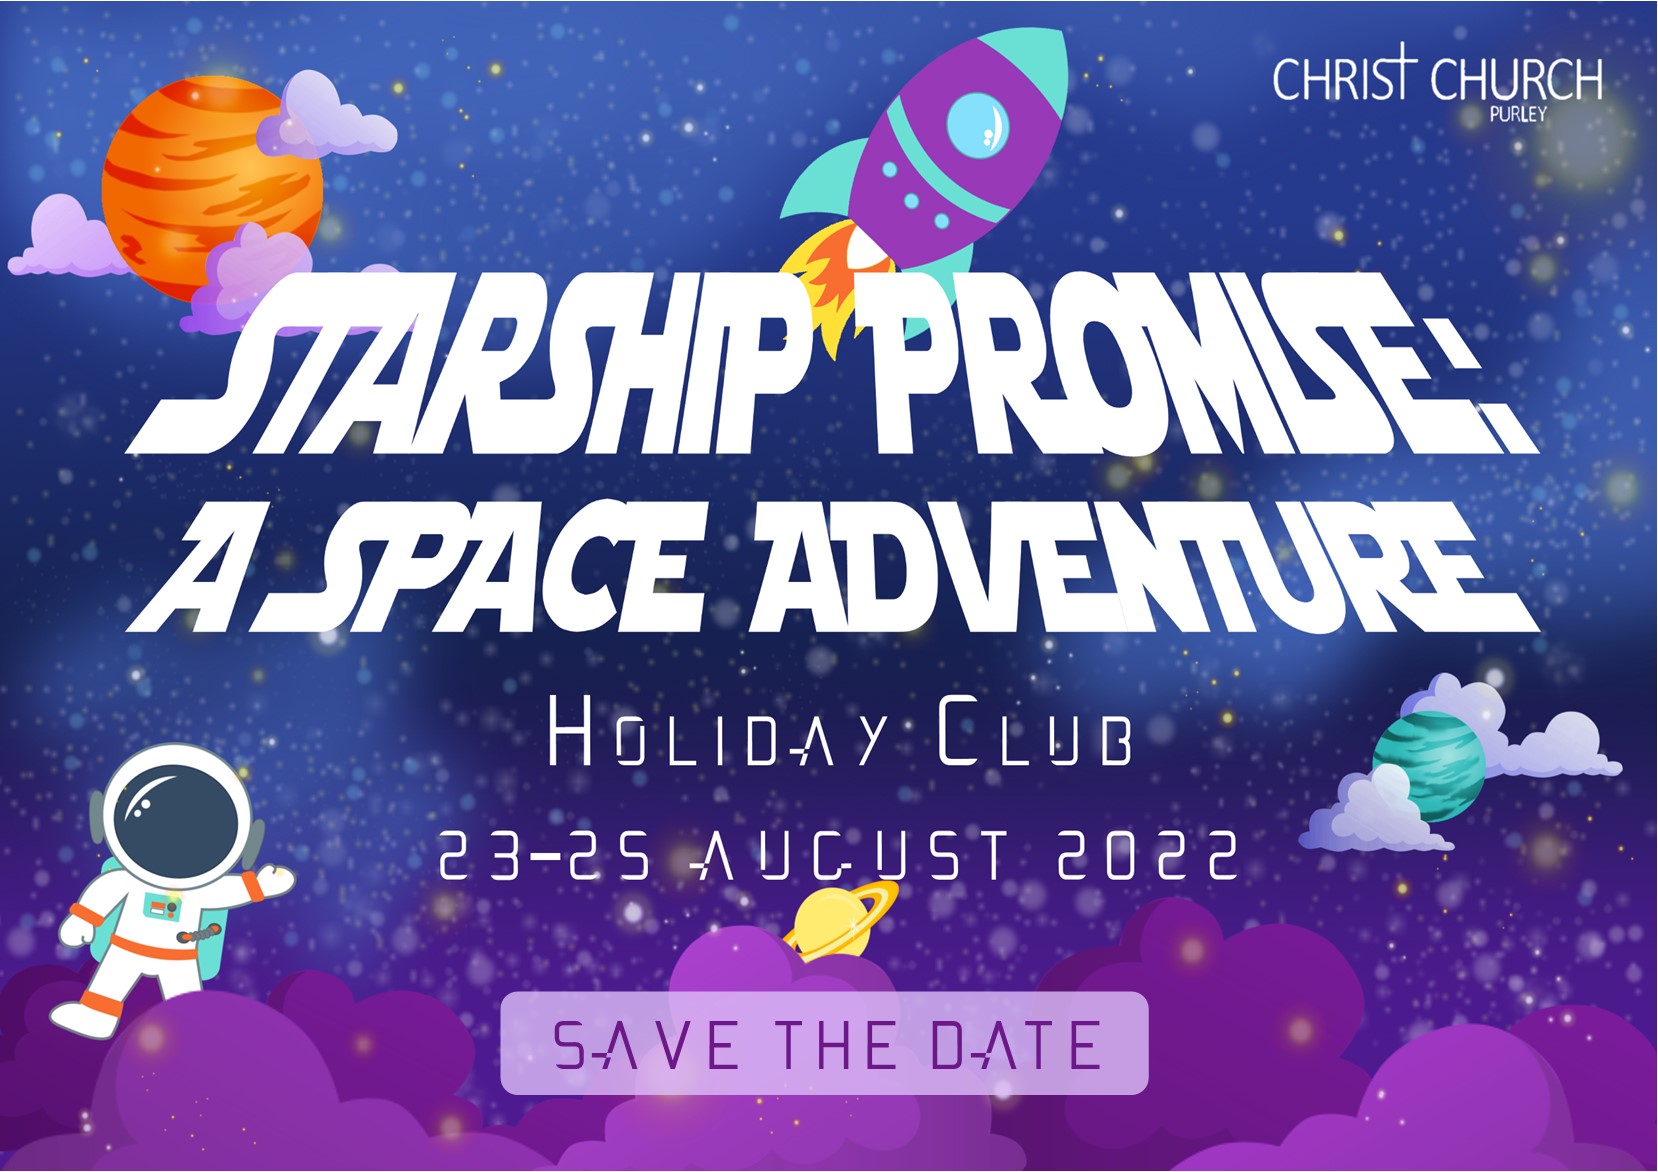 Starship Promise save the date